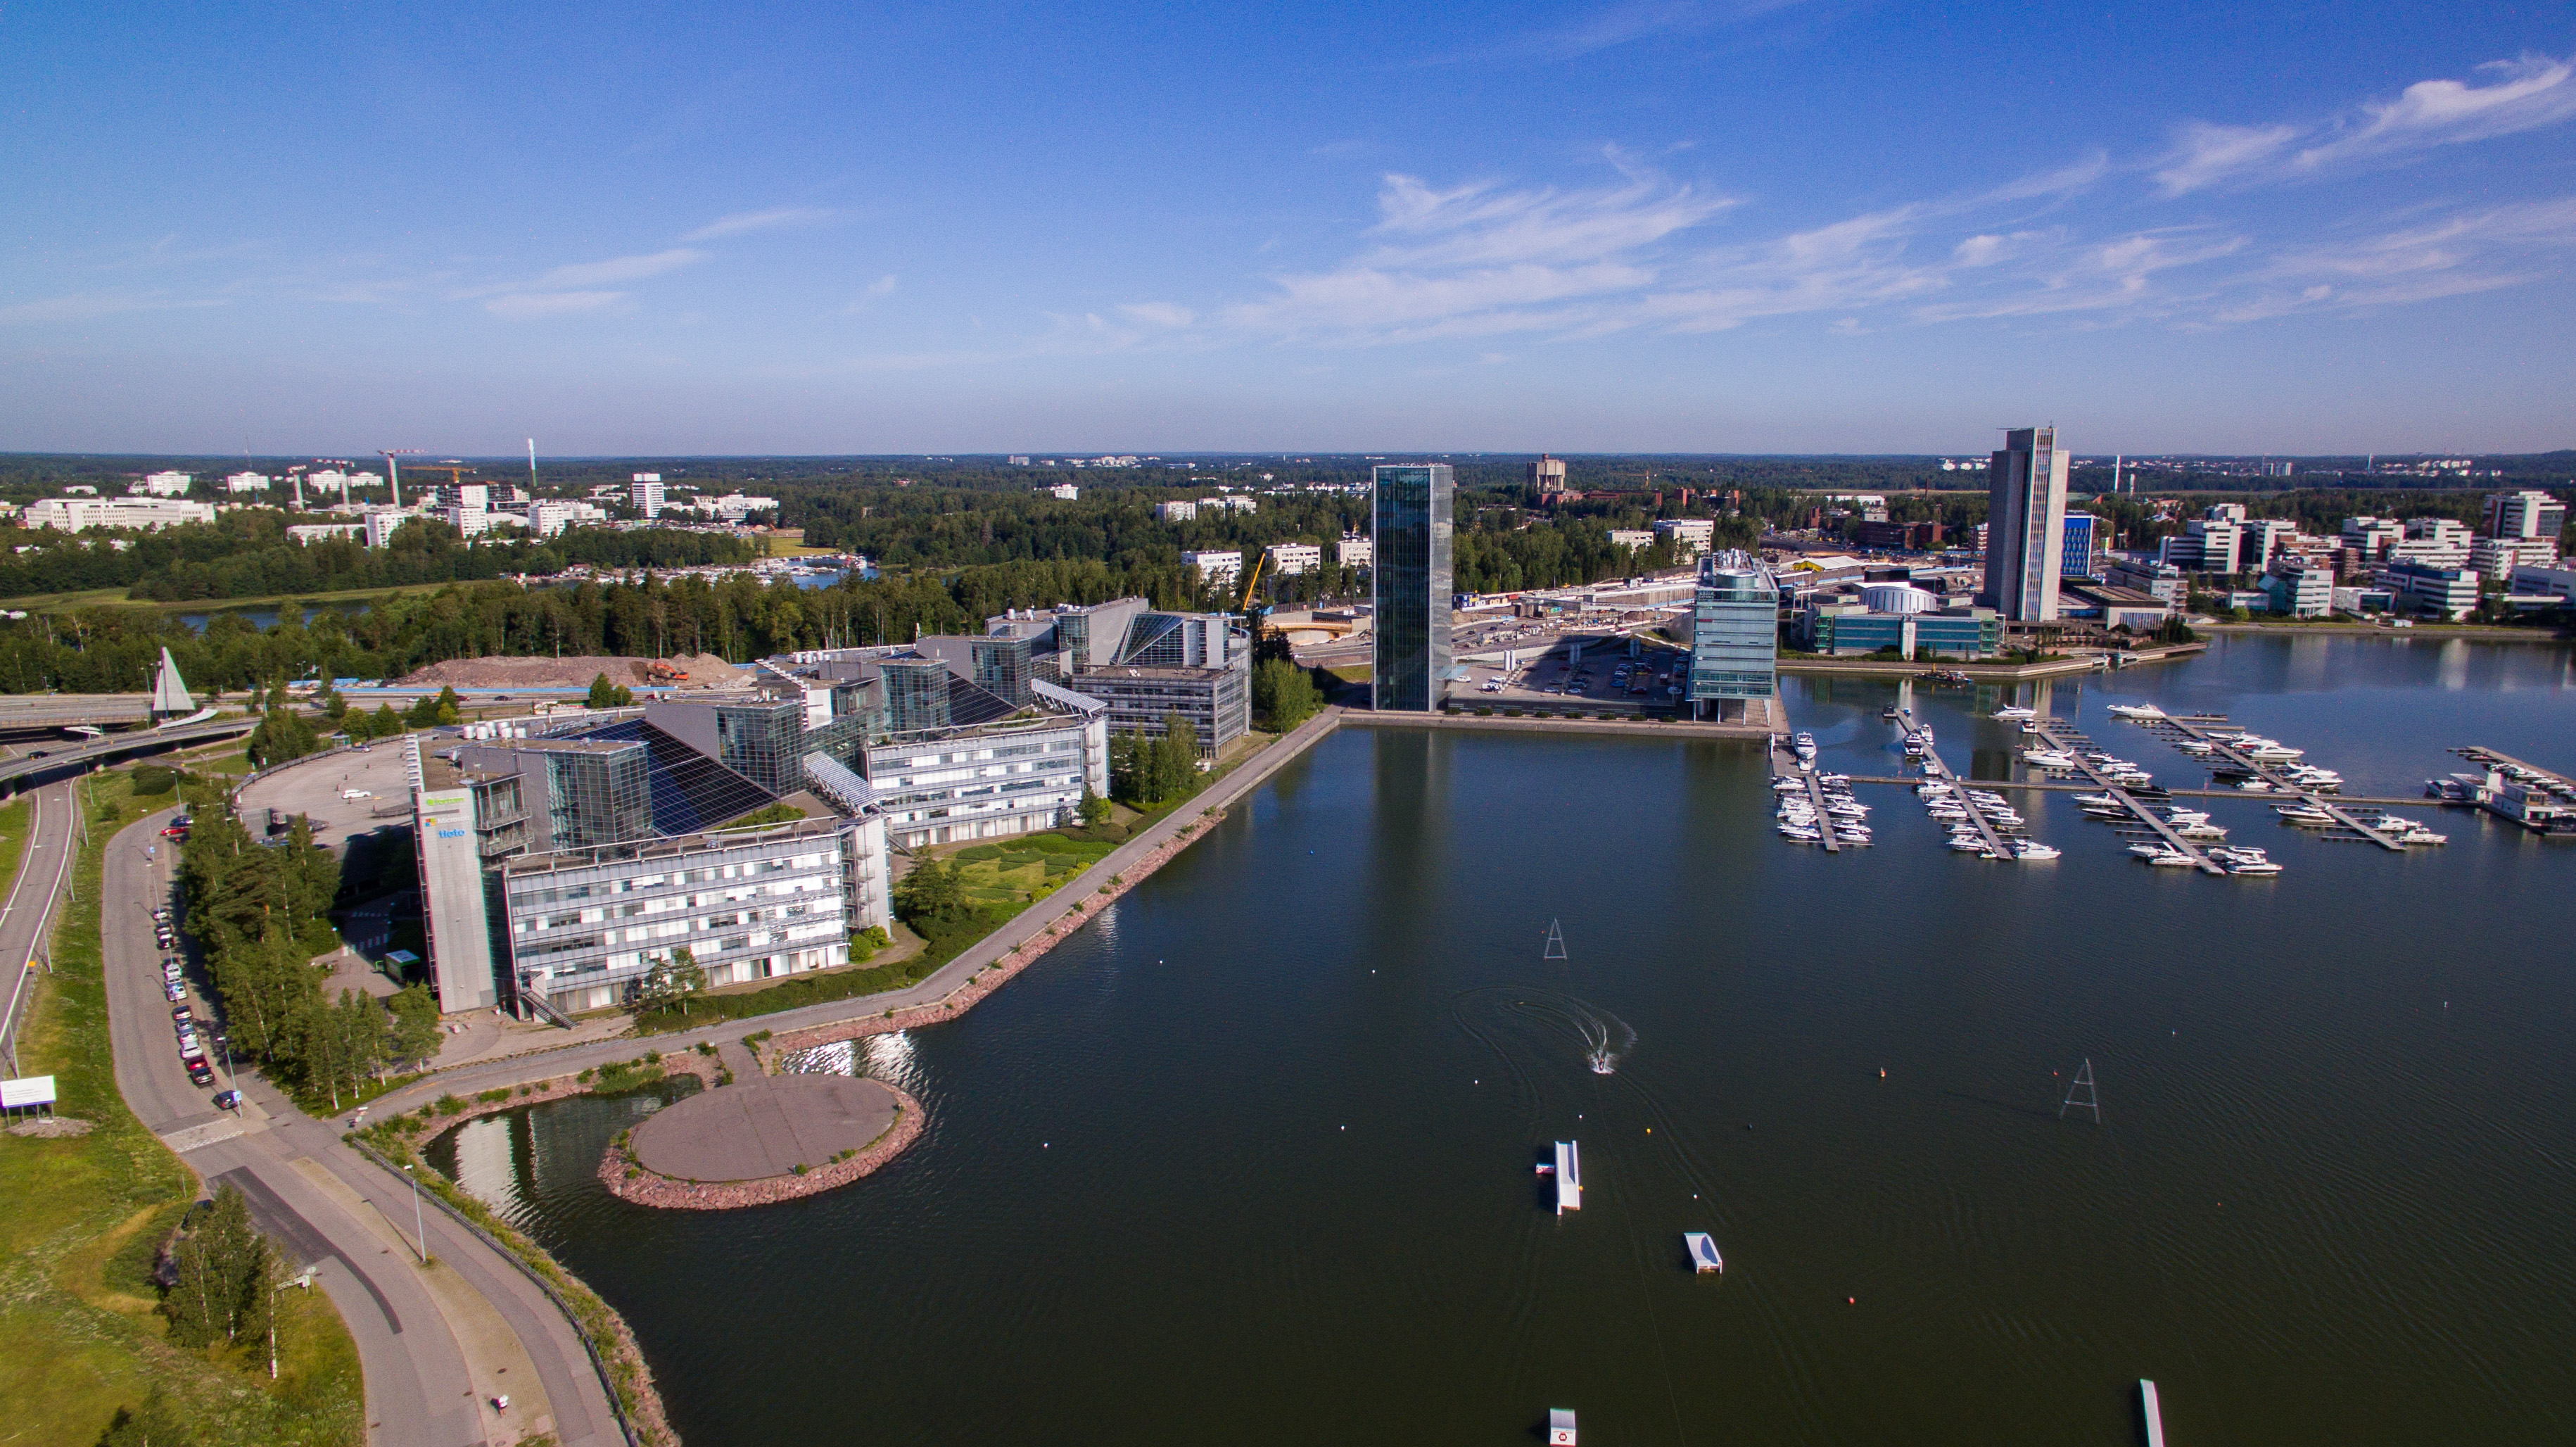 SC Software won the City of Espoo’s tendering for a sourcing solution